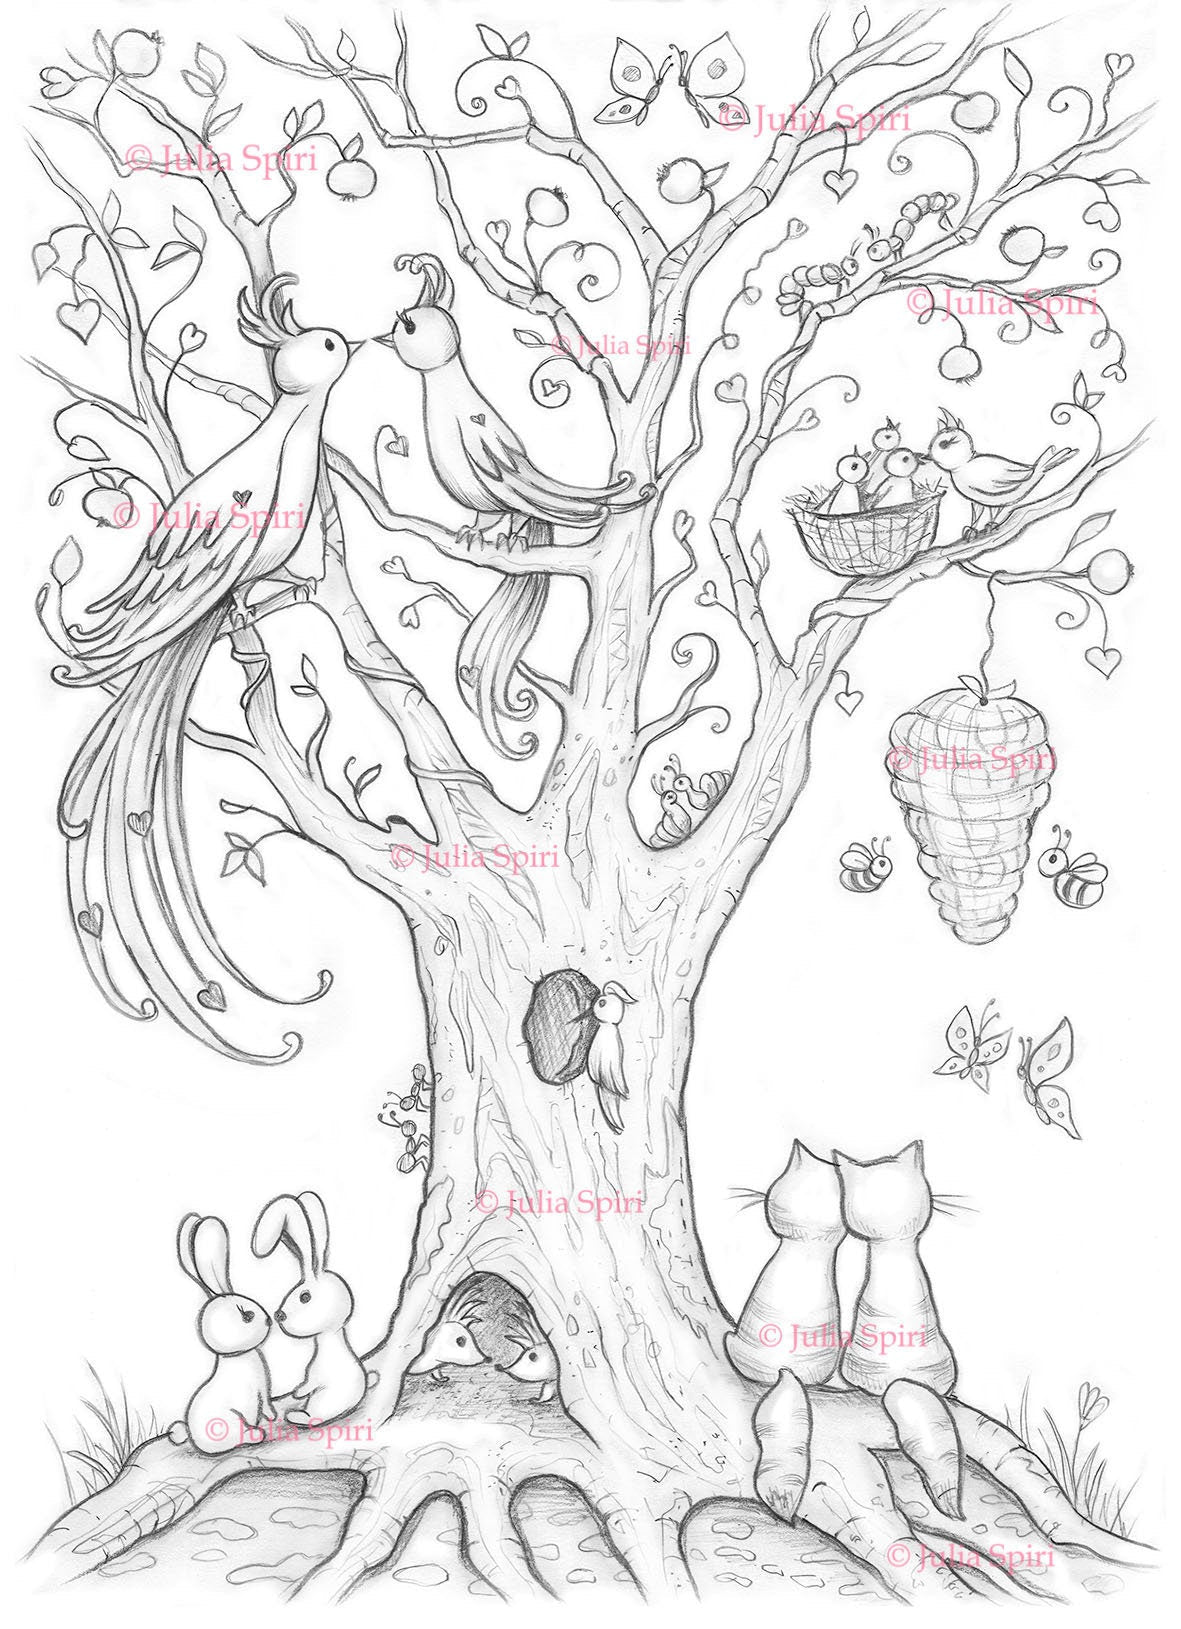 Coloring page tree with animals birds bees rabbits cats tree of â the art of julia spiri